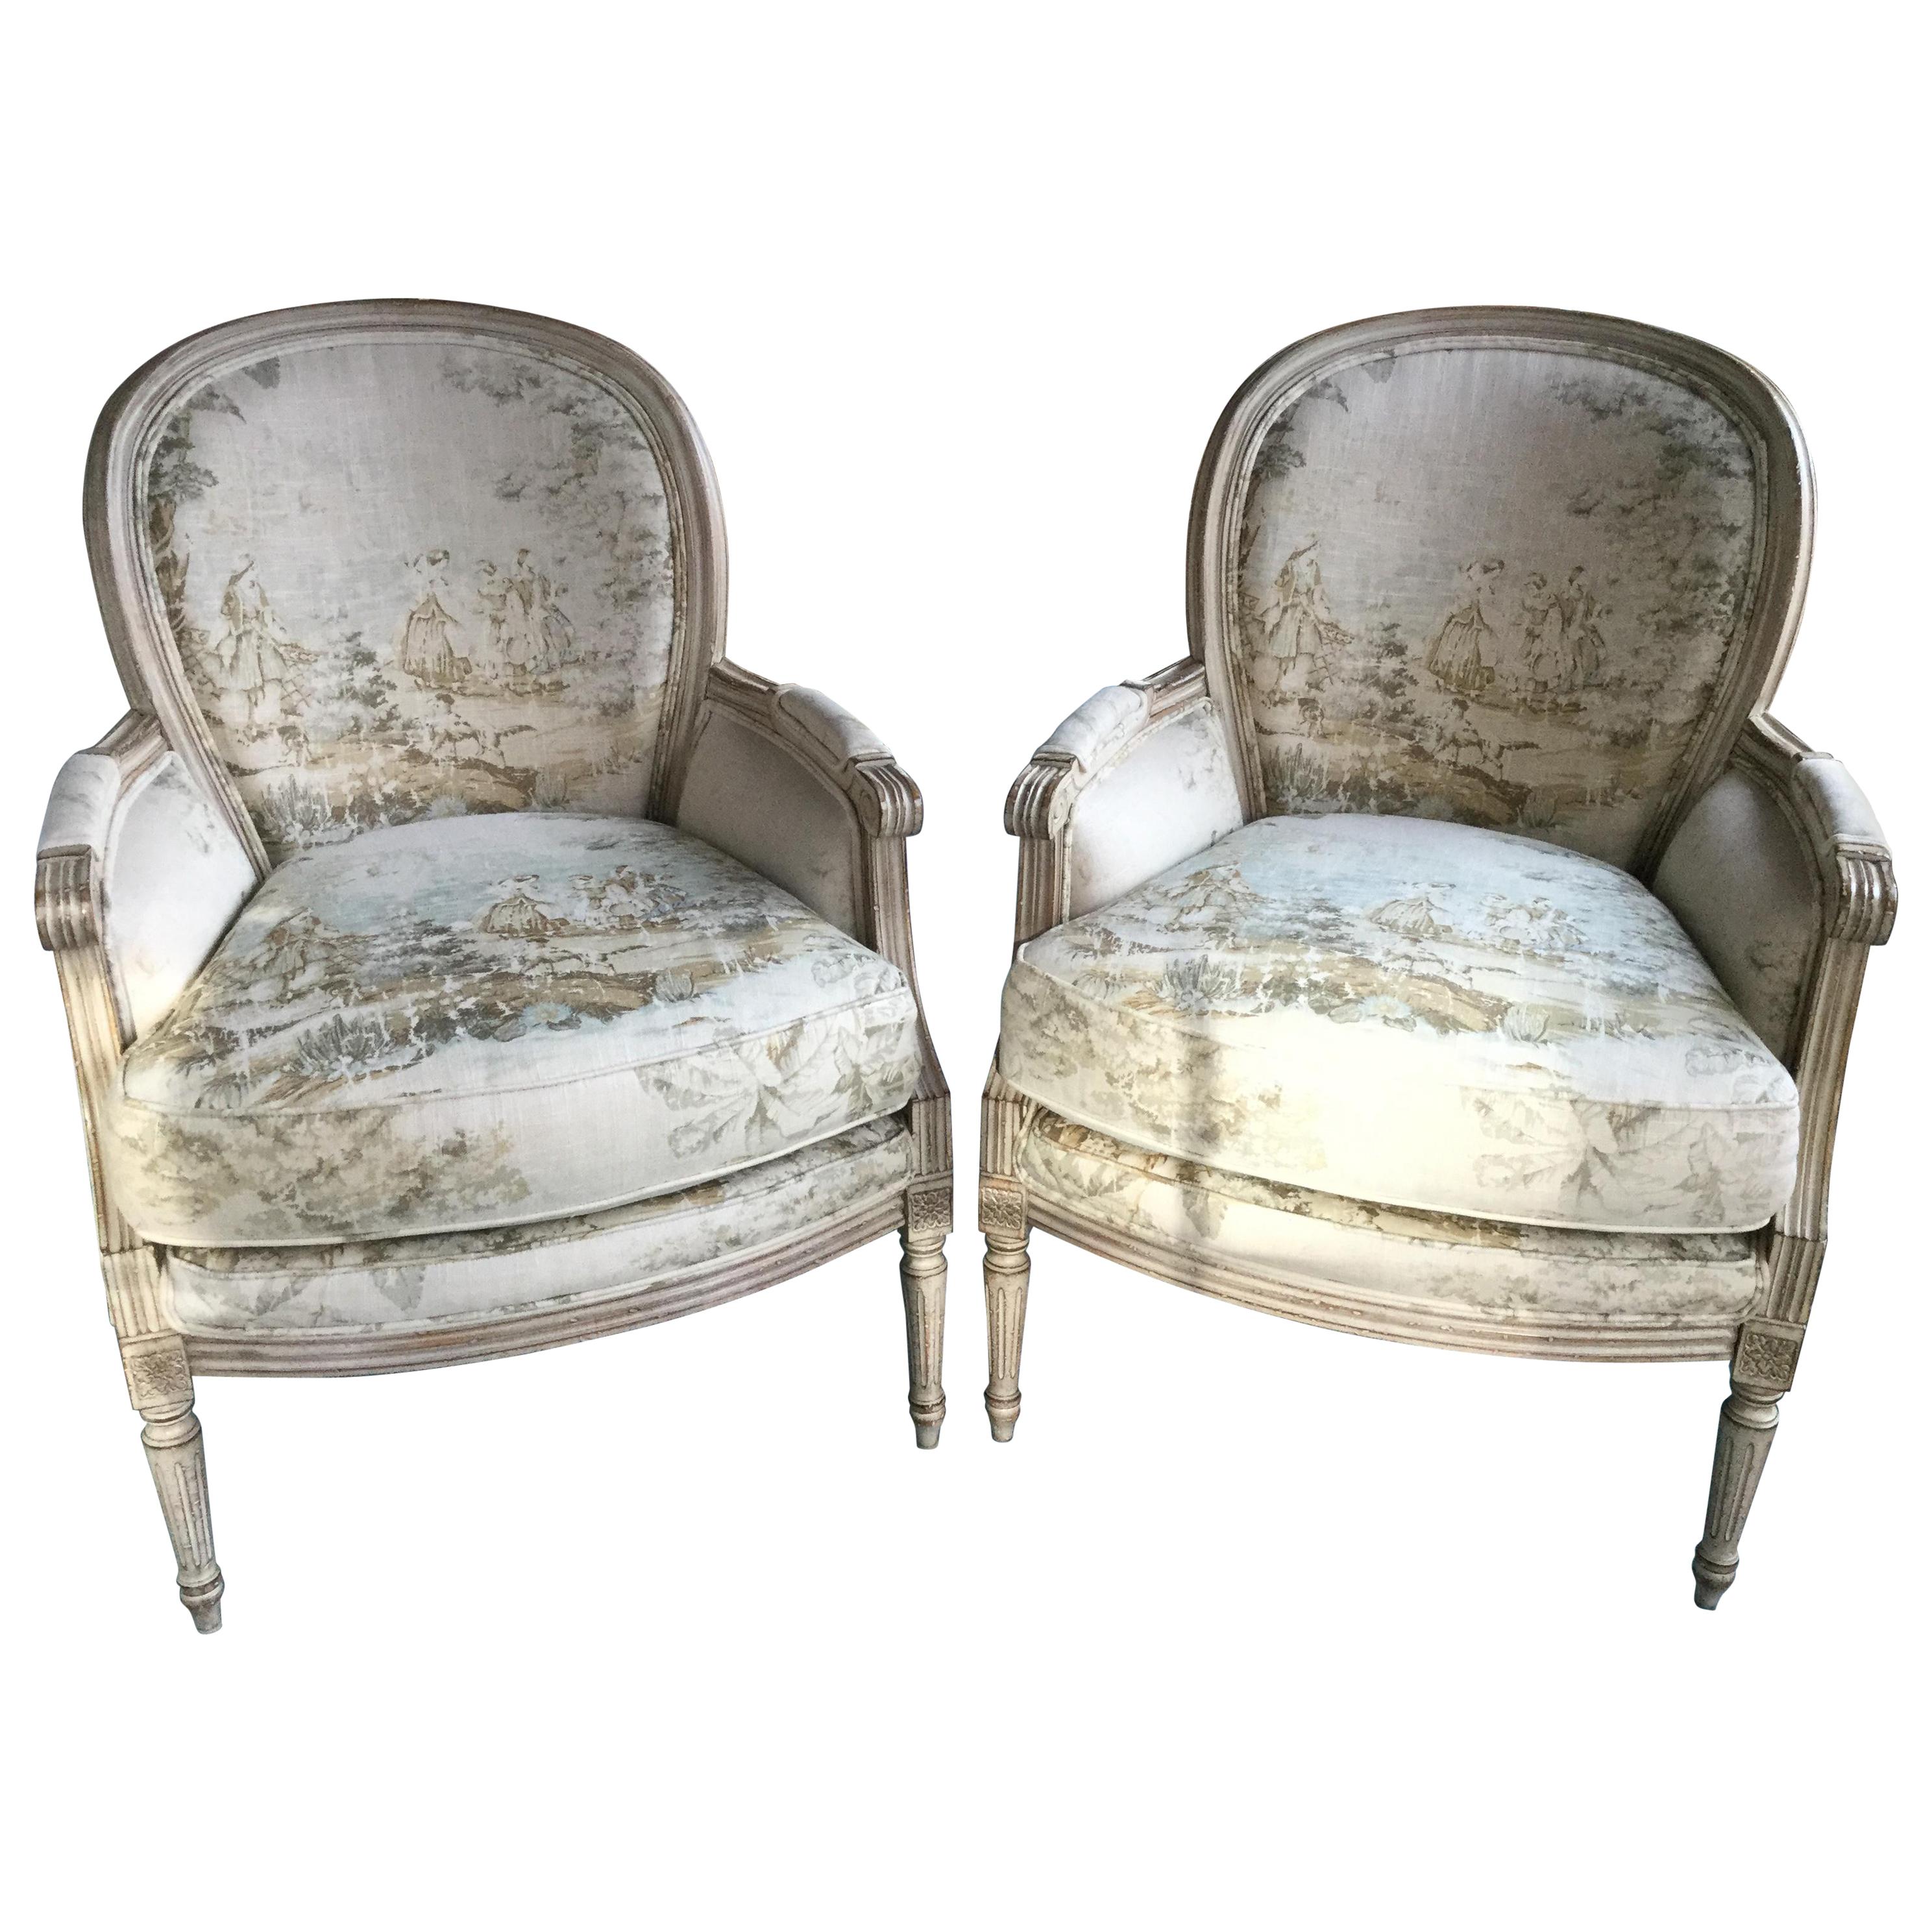 Pair of Louis XVI Style Painted Chairs